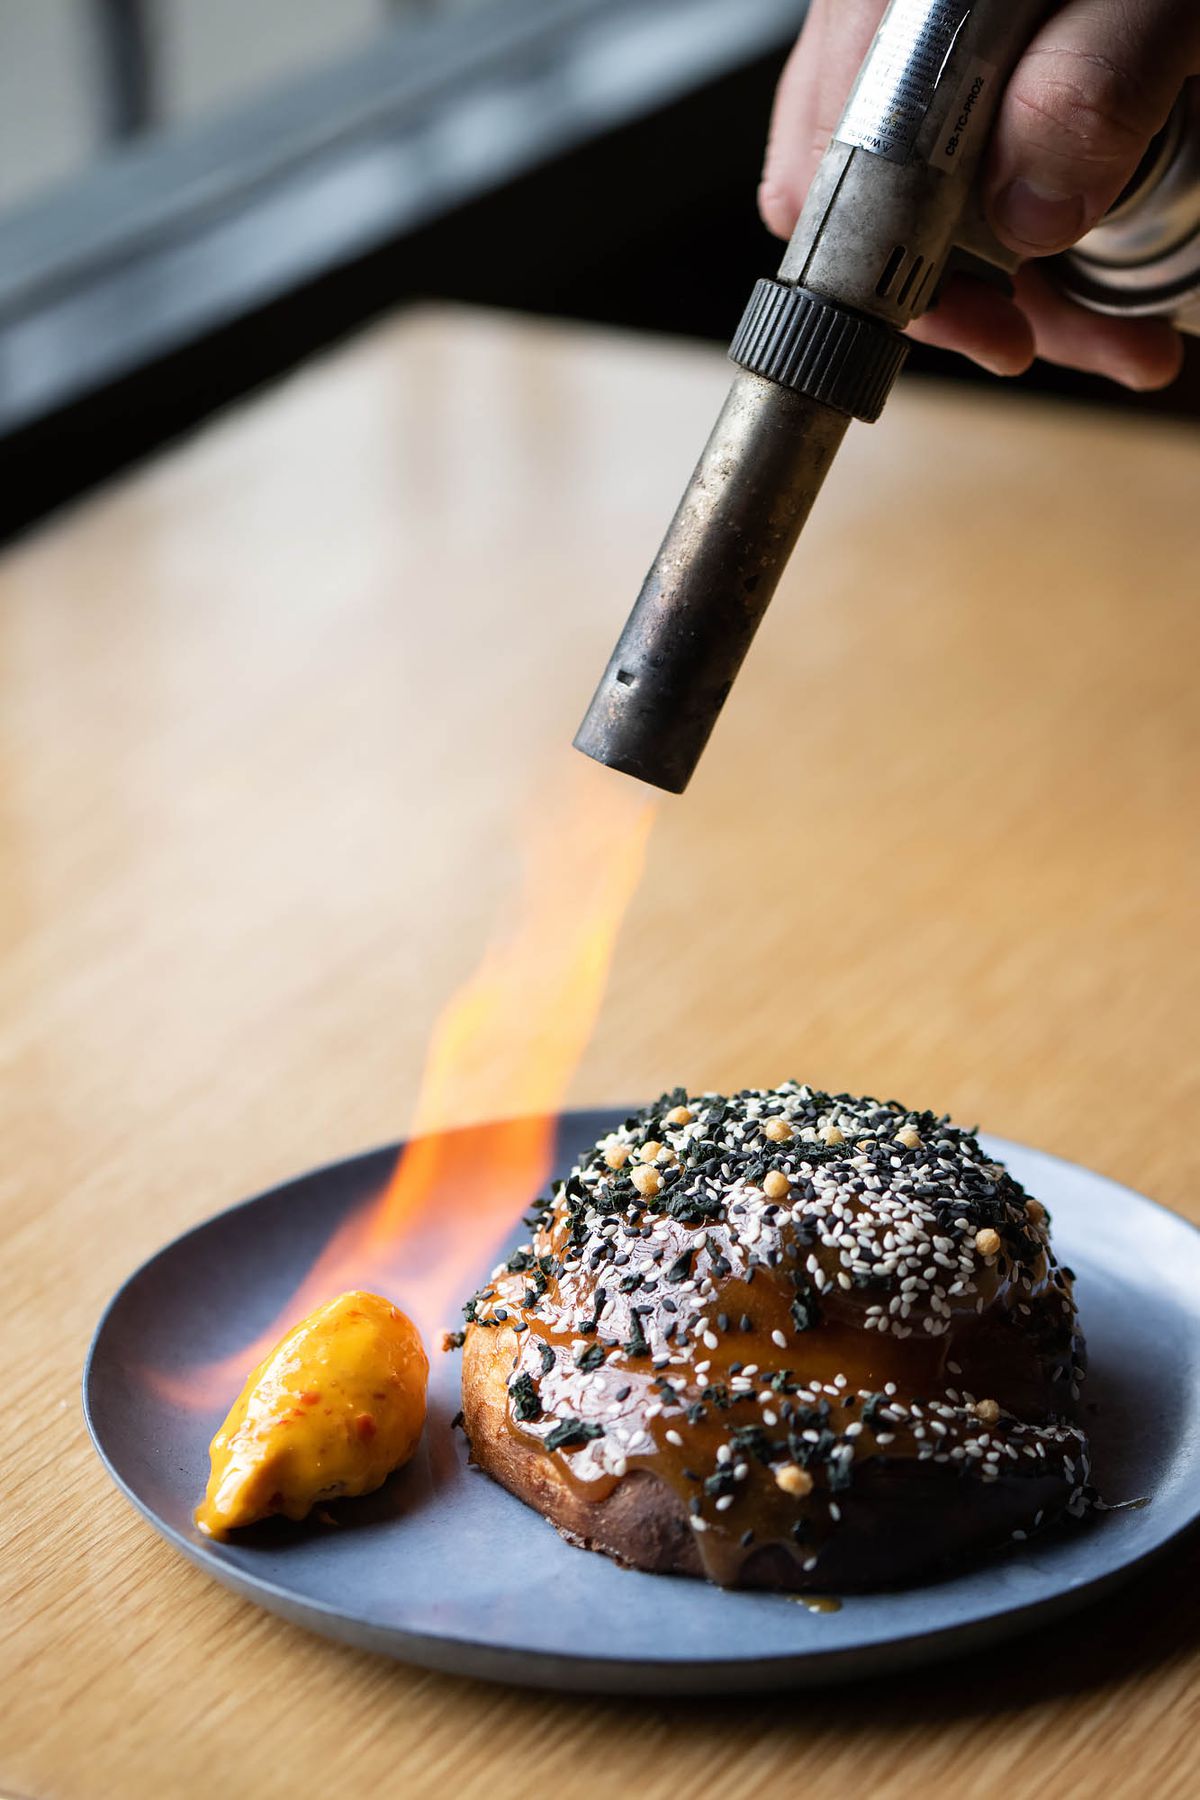 A blowtorch heats up butter next to a seeded roll on a plate.